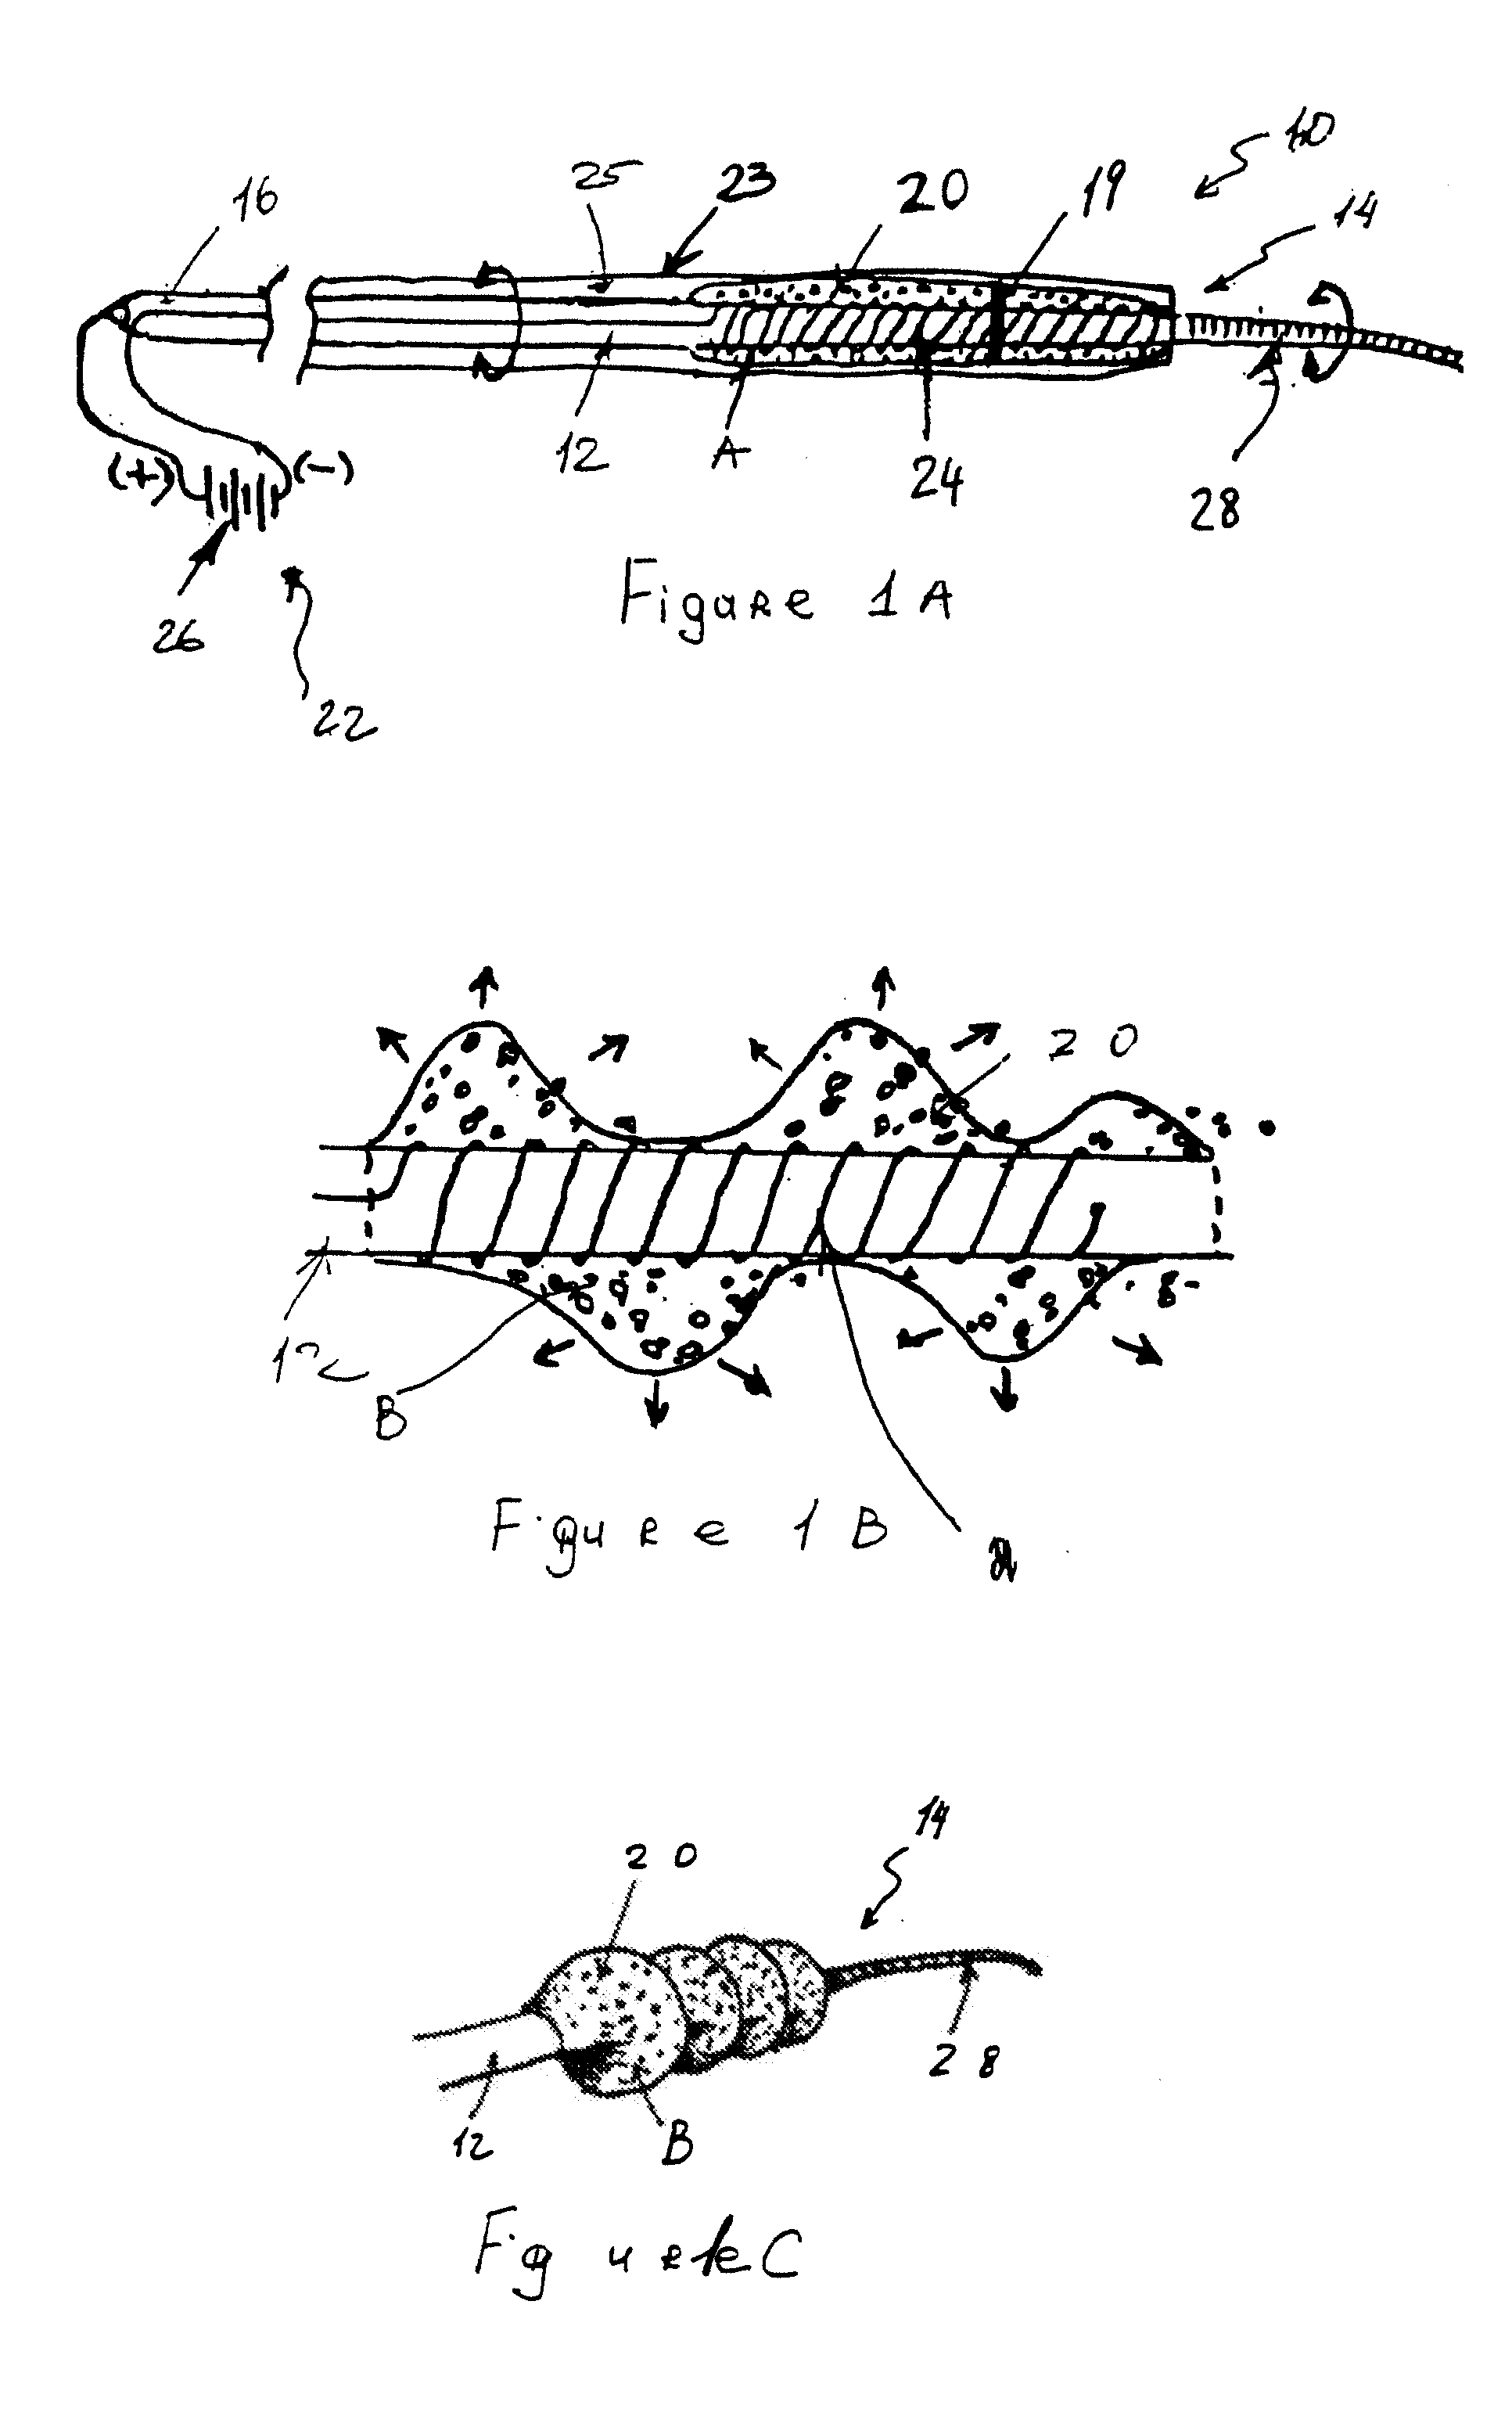 Devices and methods for removing a matter from a body cavity of a patient